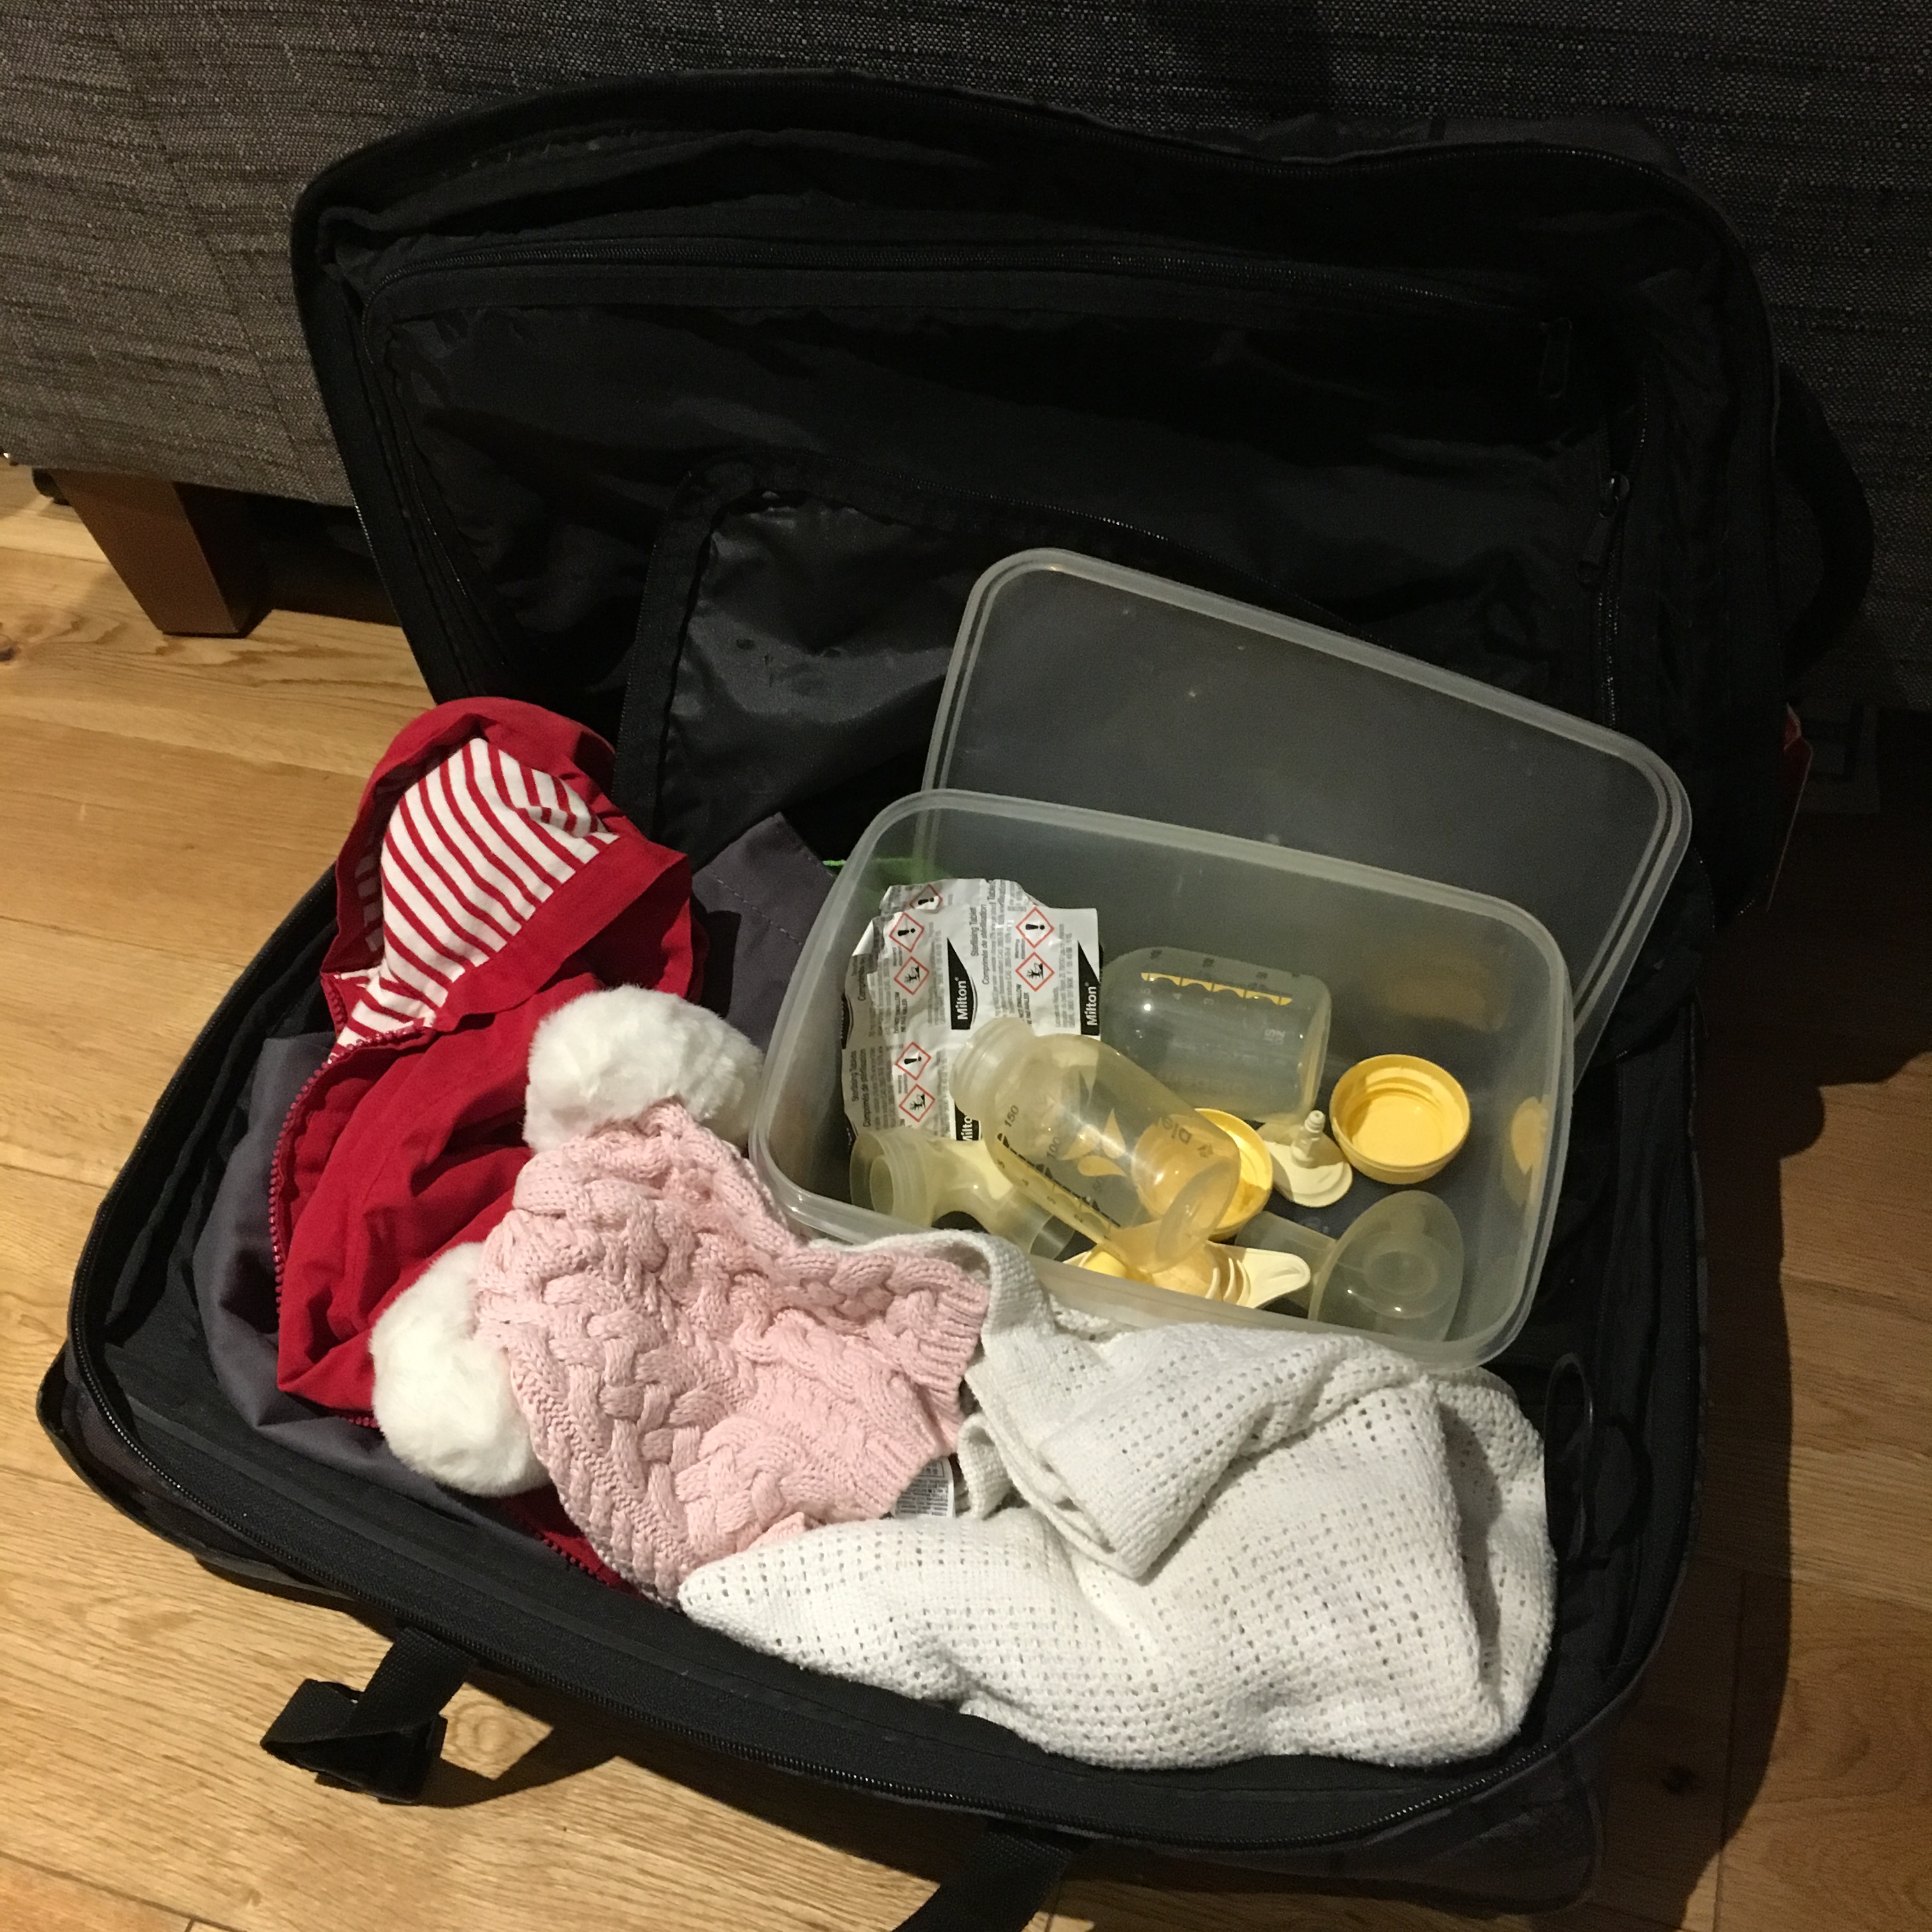 Essential kit for cold sterilising – feeding equipment, sterilising tablets, Tupperware box – in a partially packed suitcase filled with baby clothes